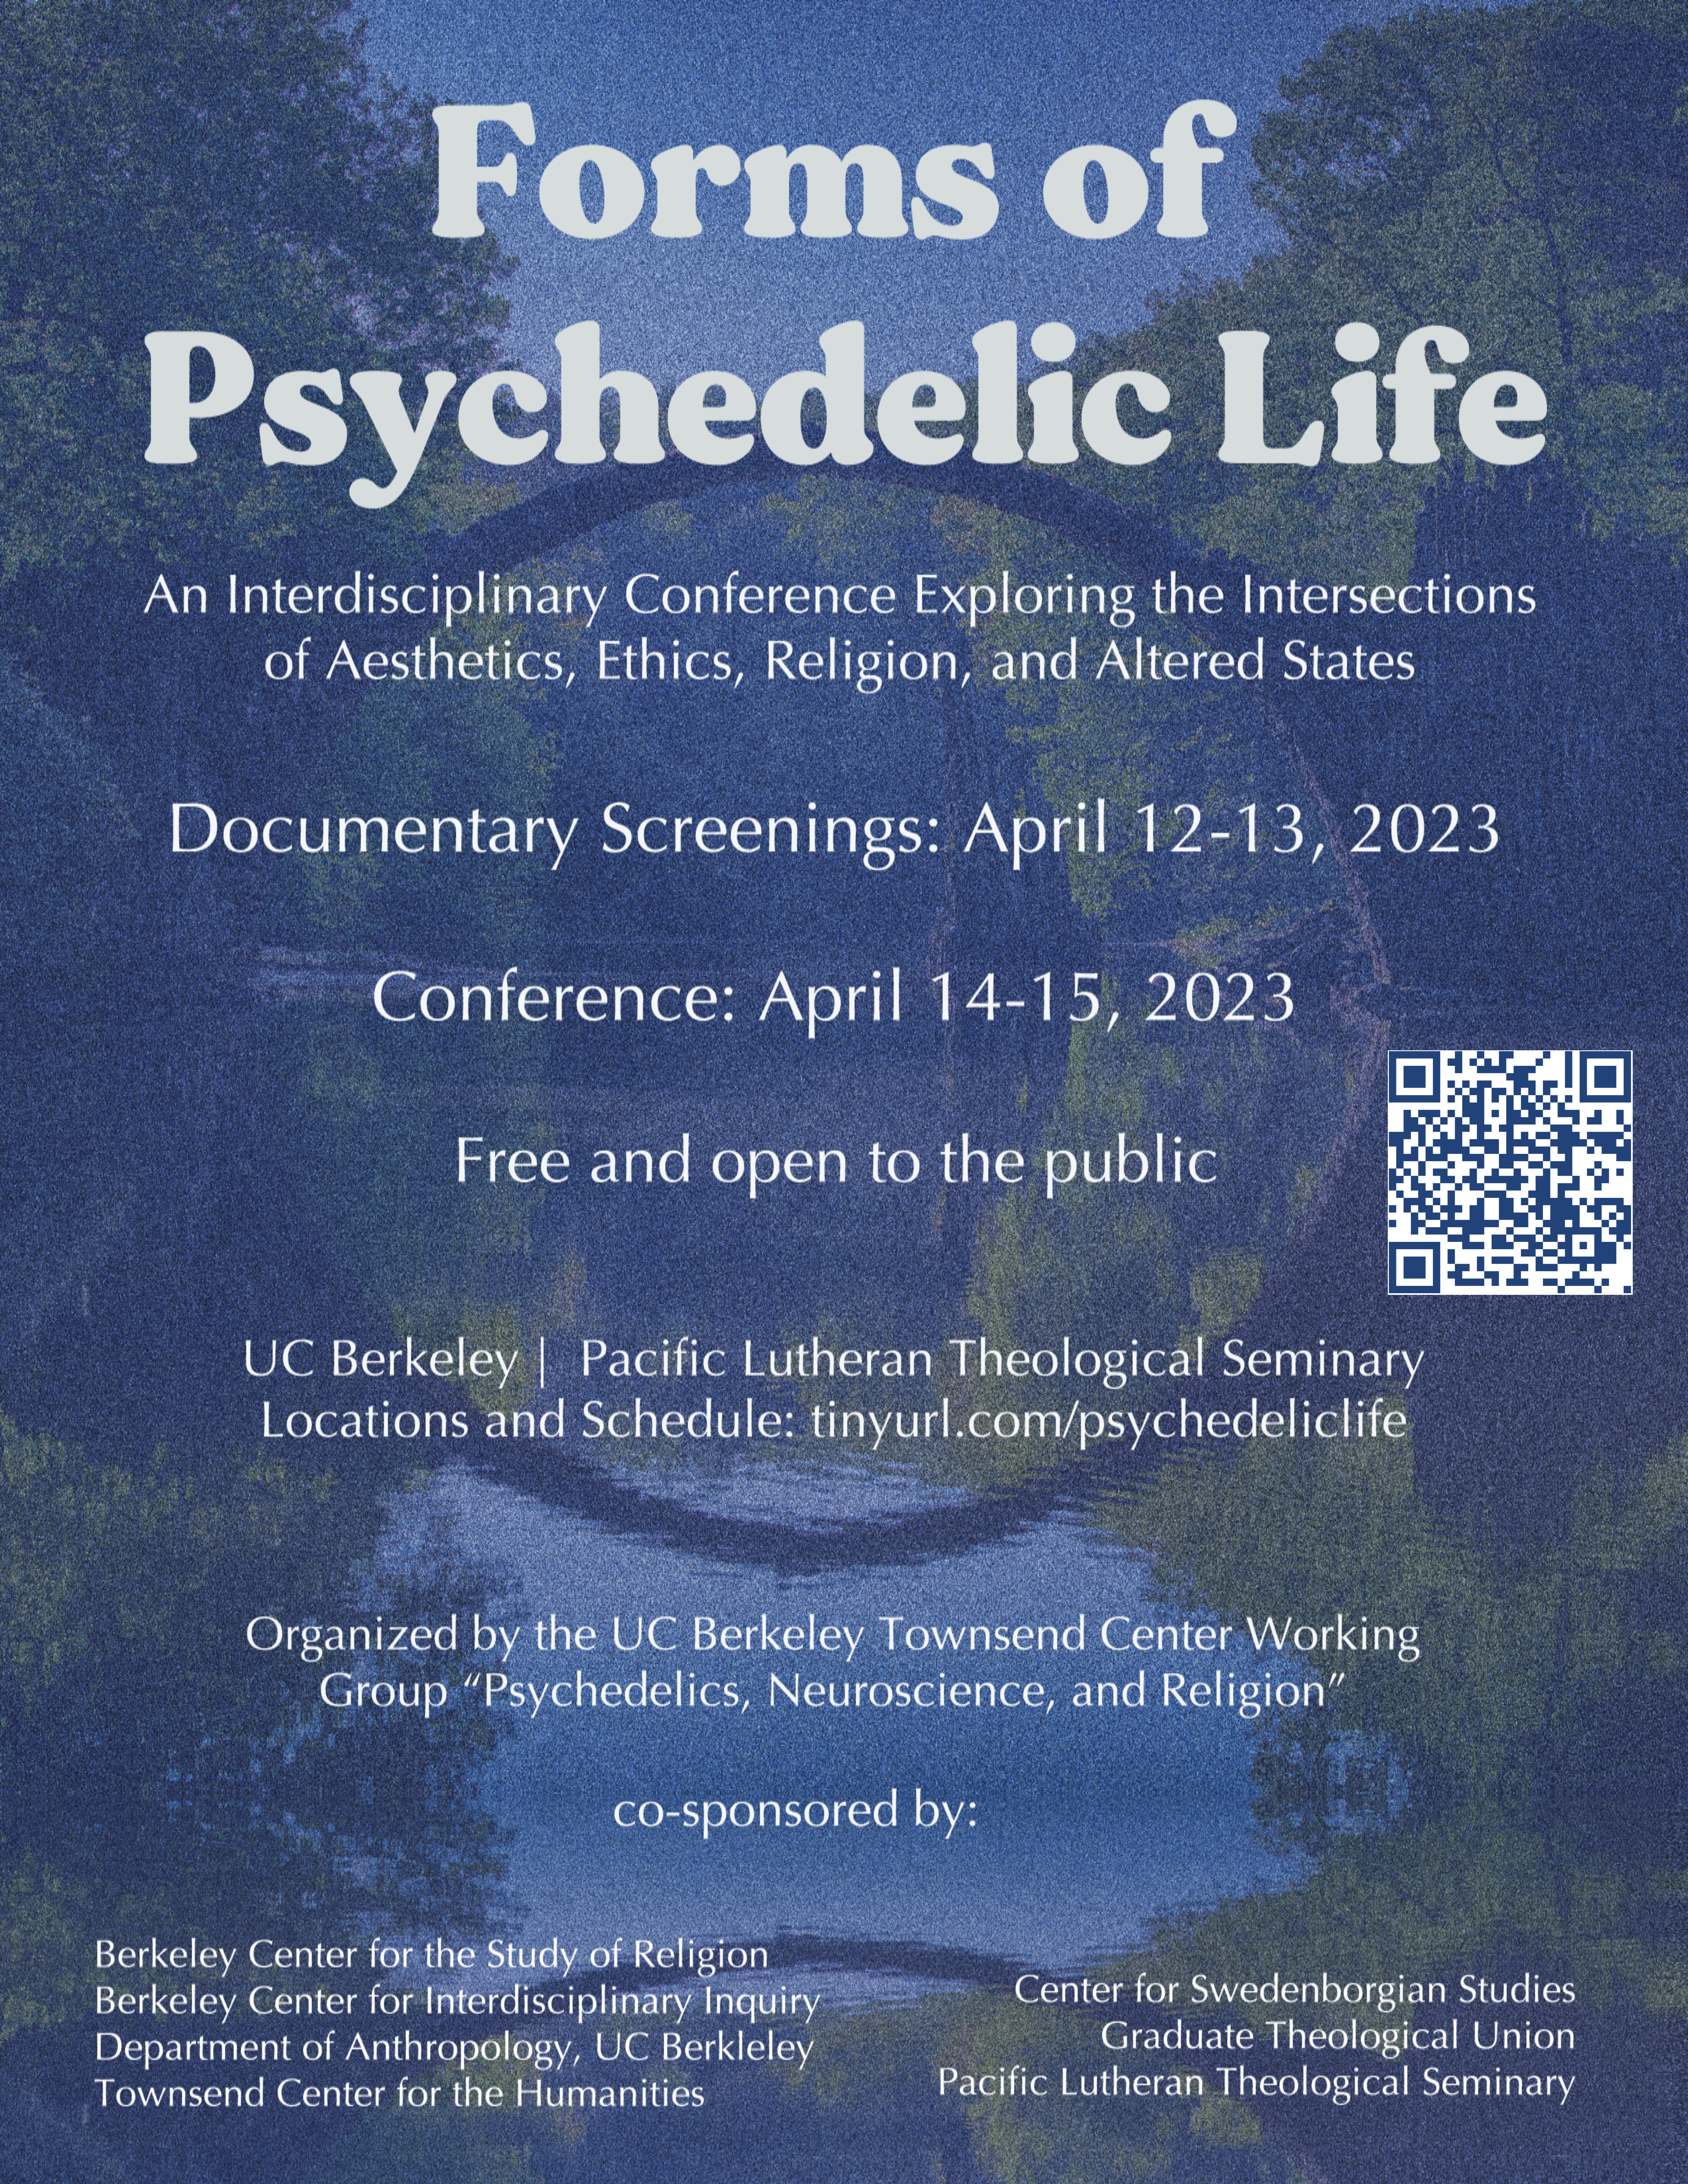 Forms of Psychedelic Life: An Interdisciplinary Conference Exploring the Intersections of Aesthetics, Ethics, Religion, and Altered States